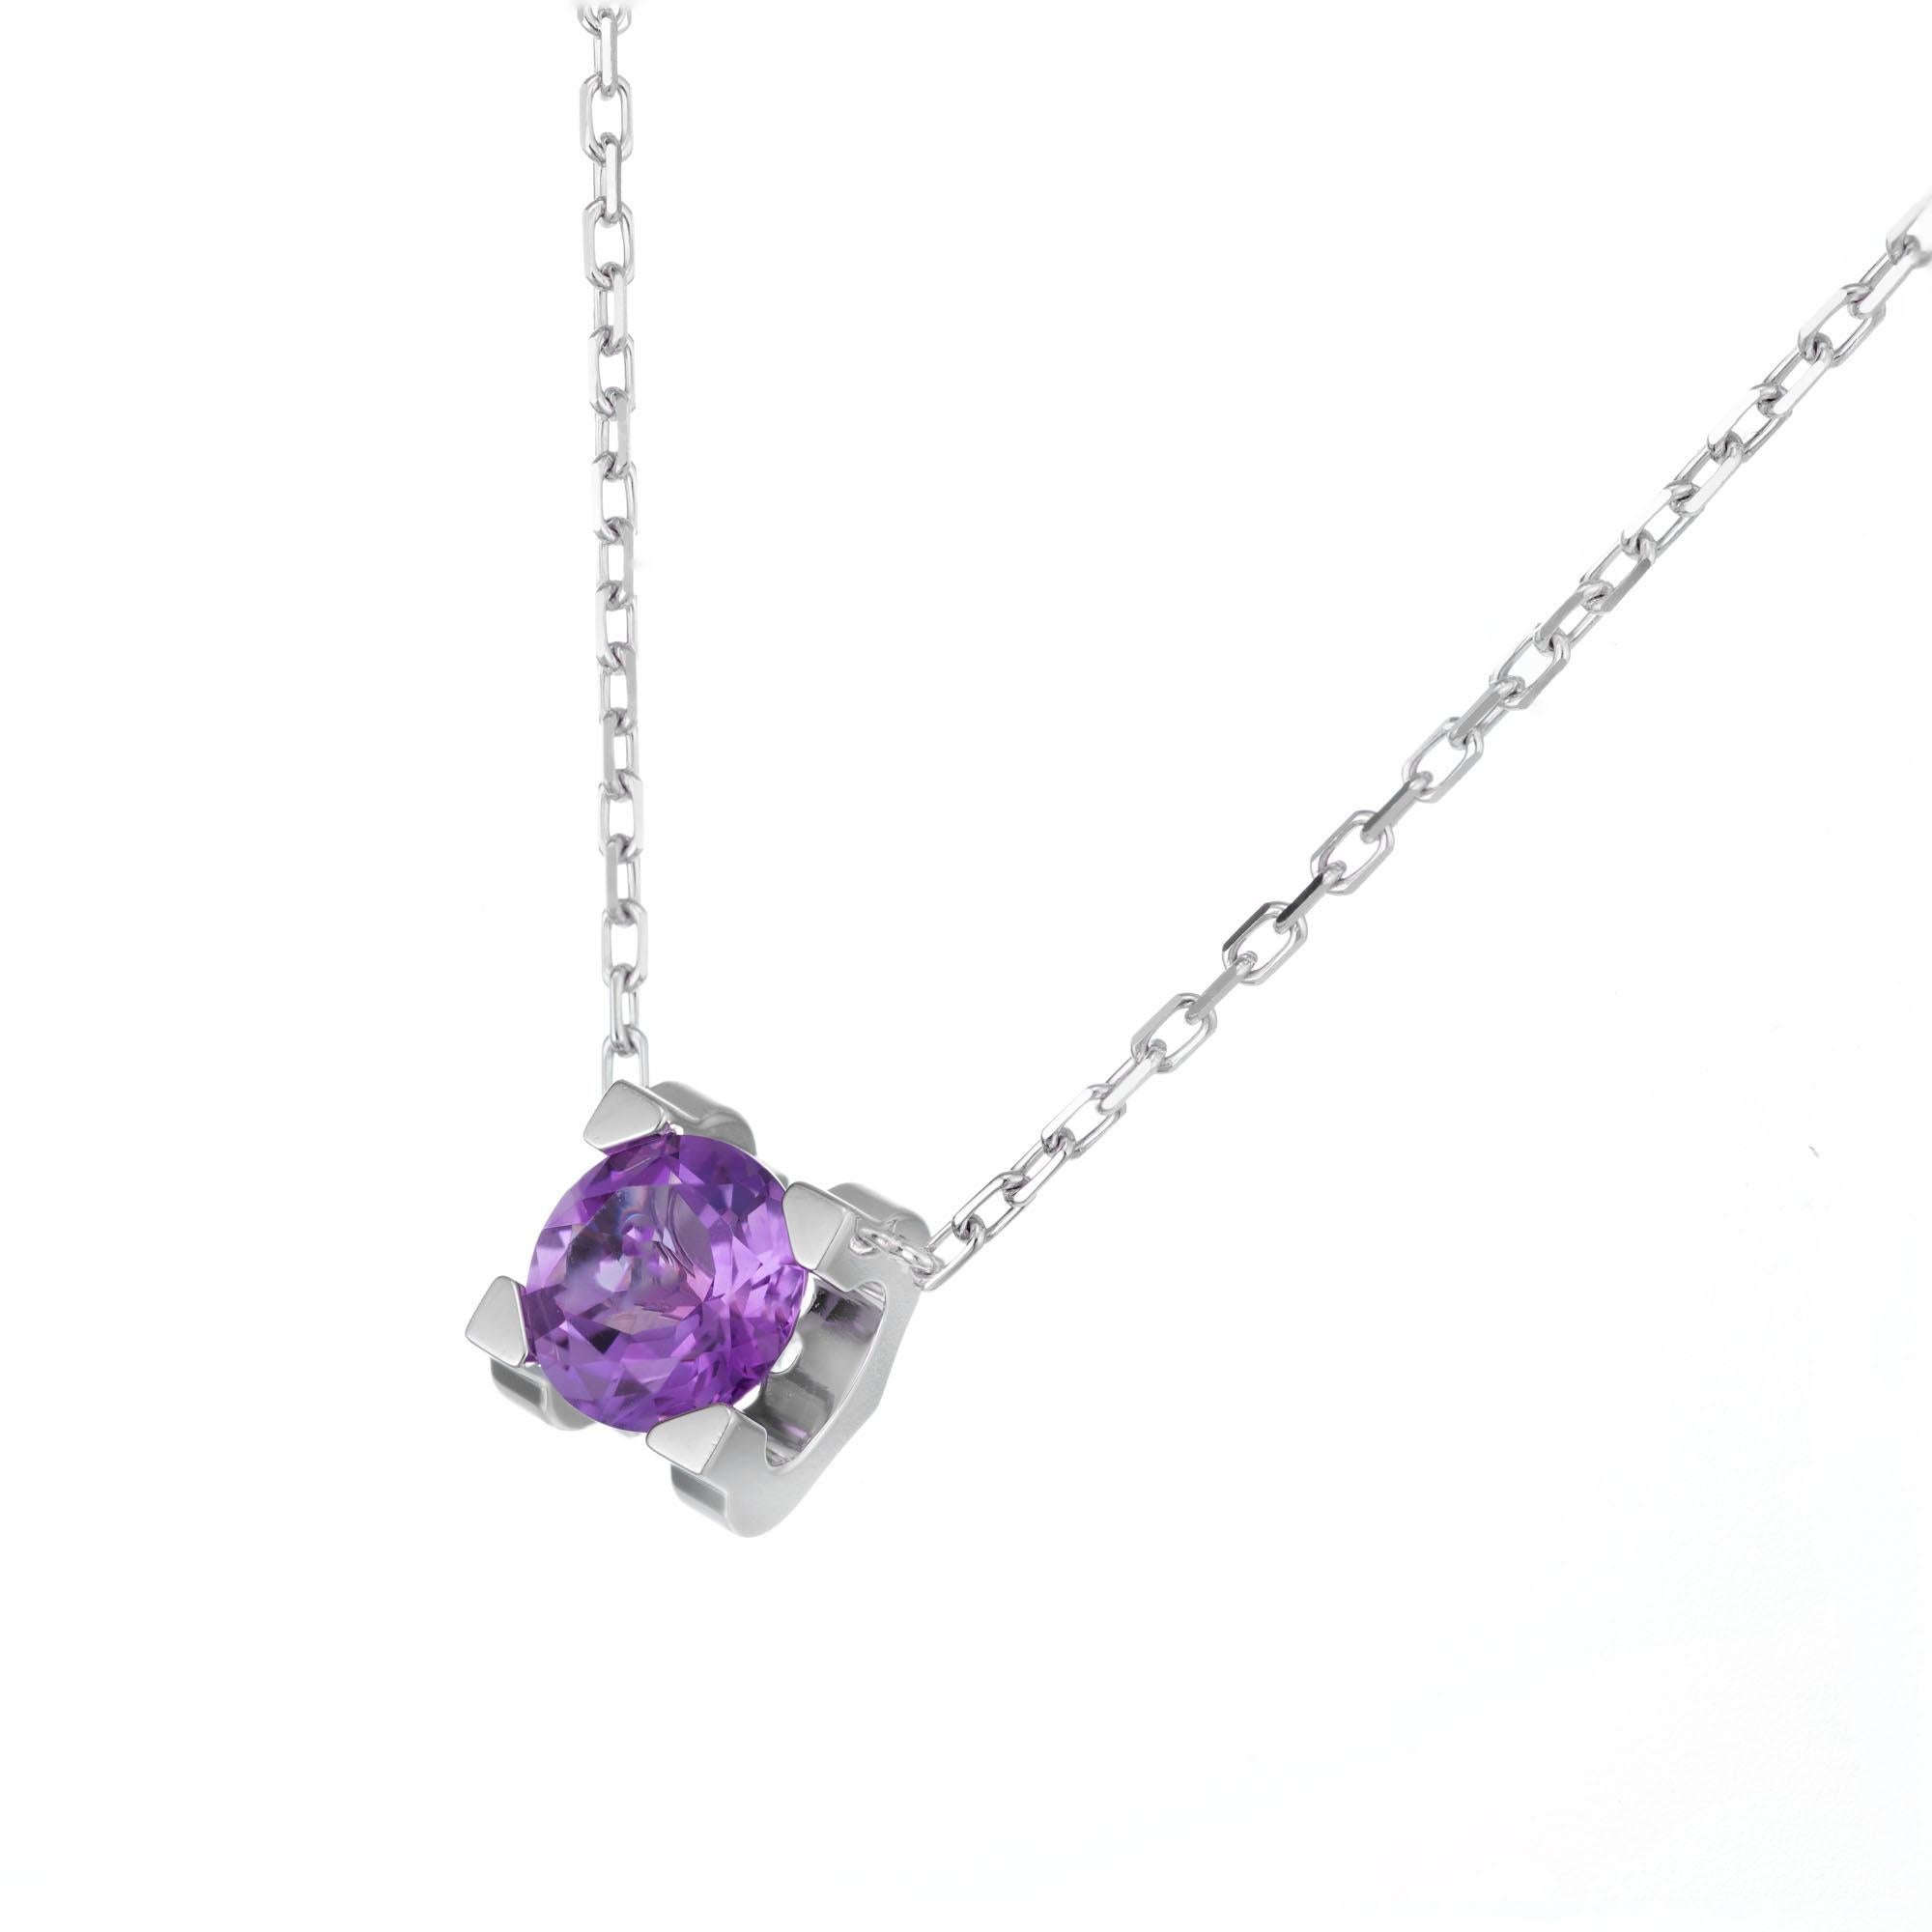 Cartier 18k white gold amethyst pendant necklace from the C de Cartier collection. A round brilliant cut Amethyst with a bright purple hue set in a claw C motif on a 16 Inch link chain with a lobster clasp. 

1 round brilliant cut purple Amethyst,